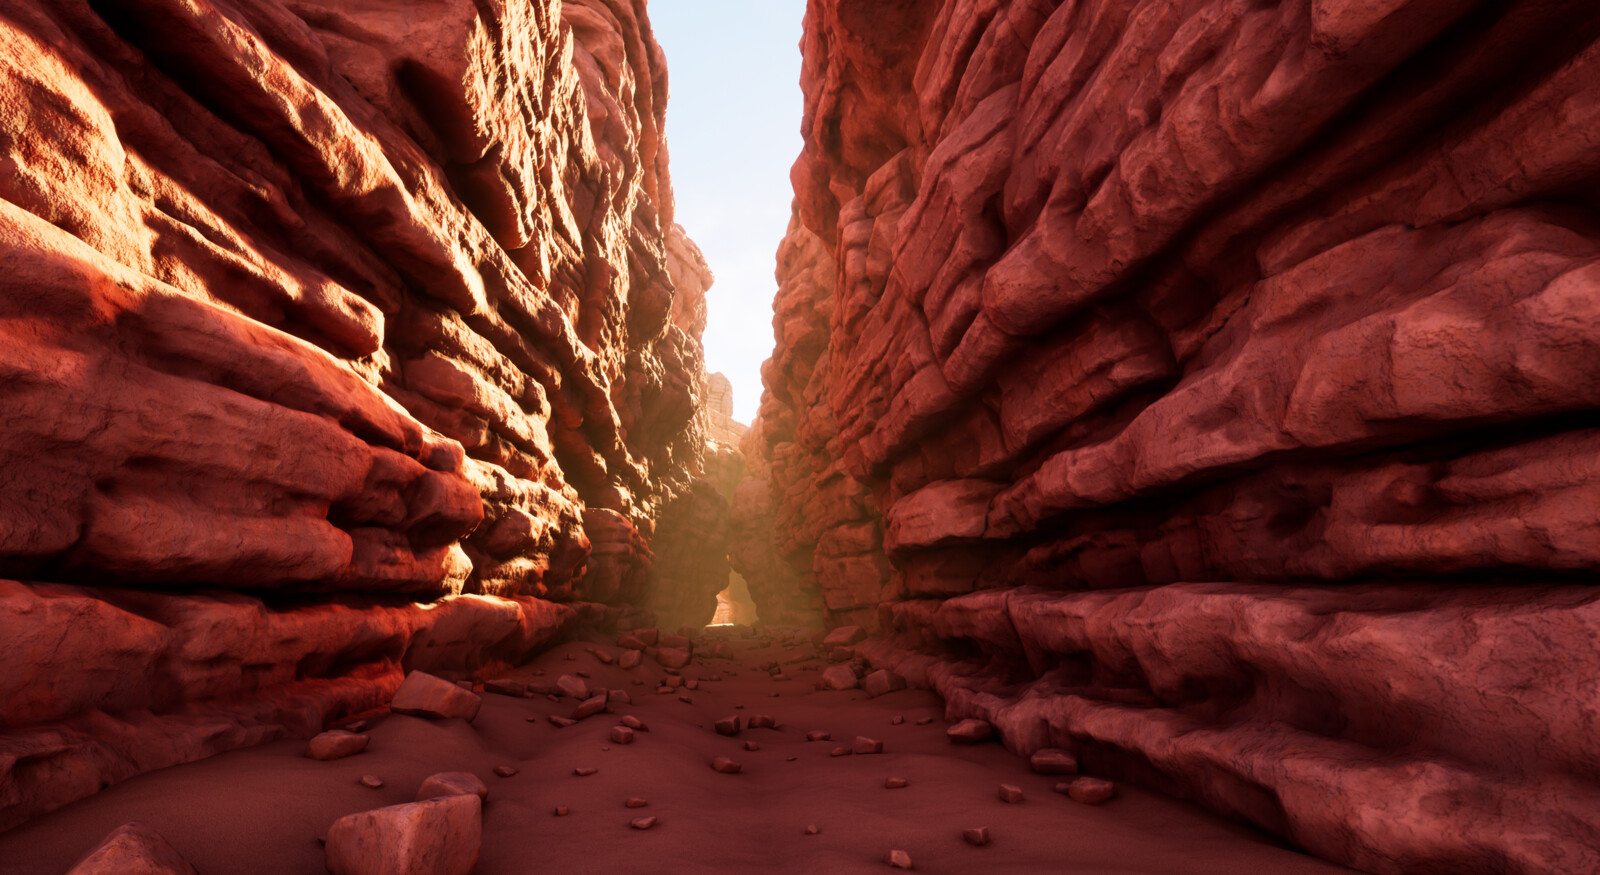 Quick scene in UE4 utilising some of the rocks to create this cliff canyon environment